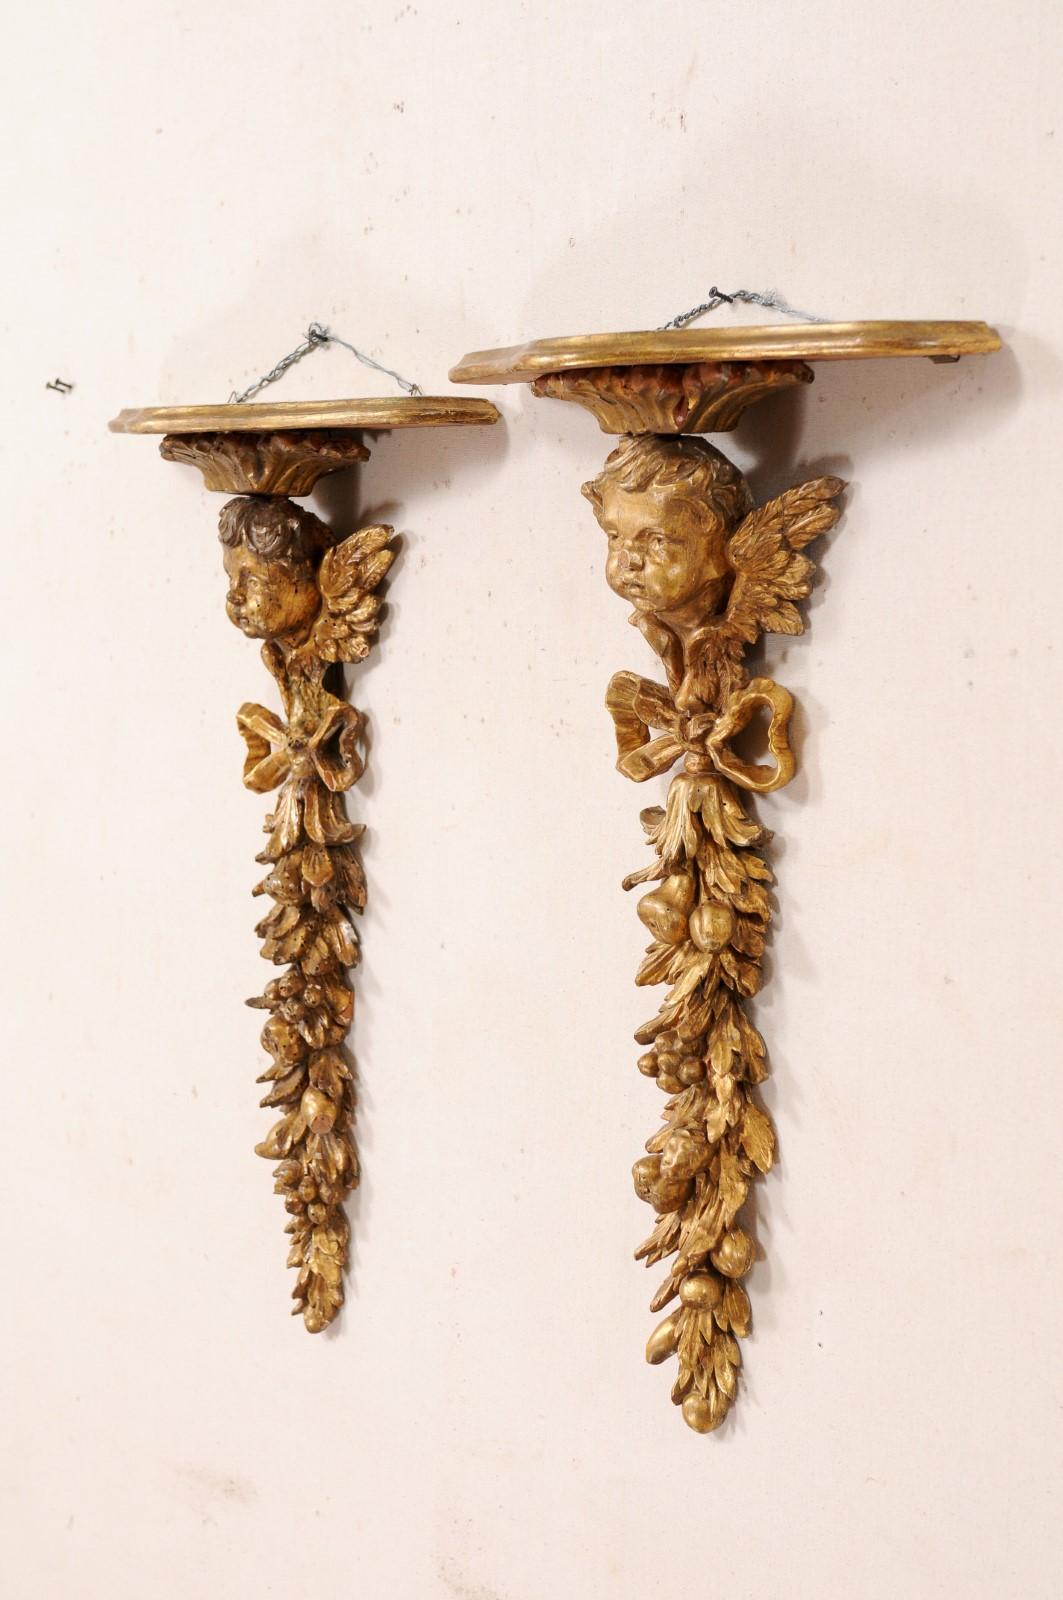 19th Century Italian Pair of Antique Carved and Giltwood Putti & Garland Fragments with Shelf